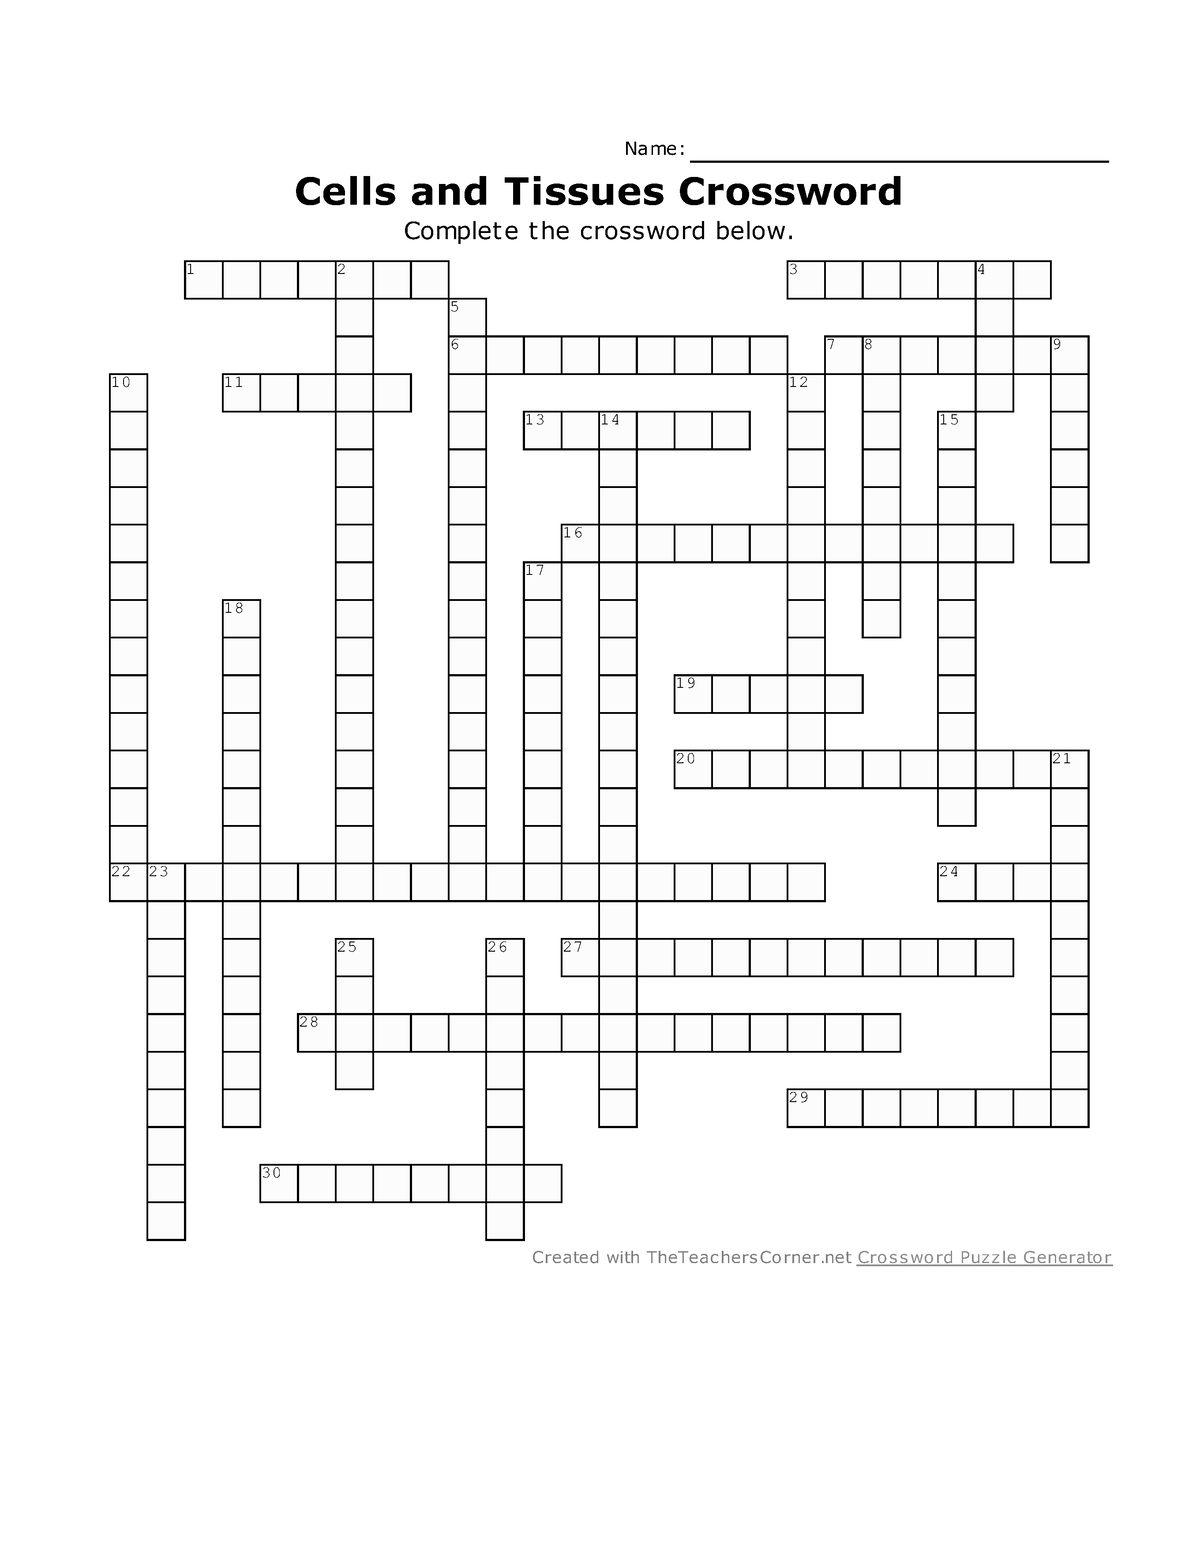 Cells and Tissues Crossword Name: Cells and Tissues Crossword Complet